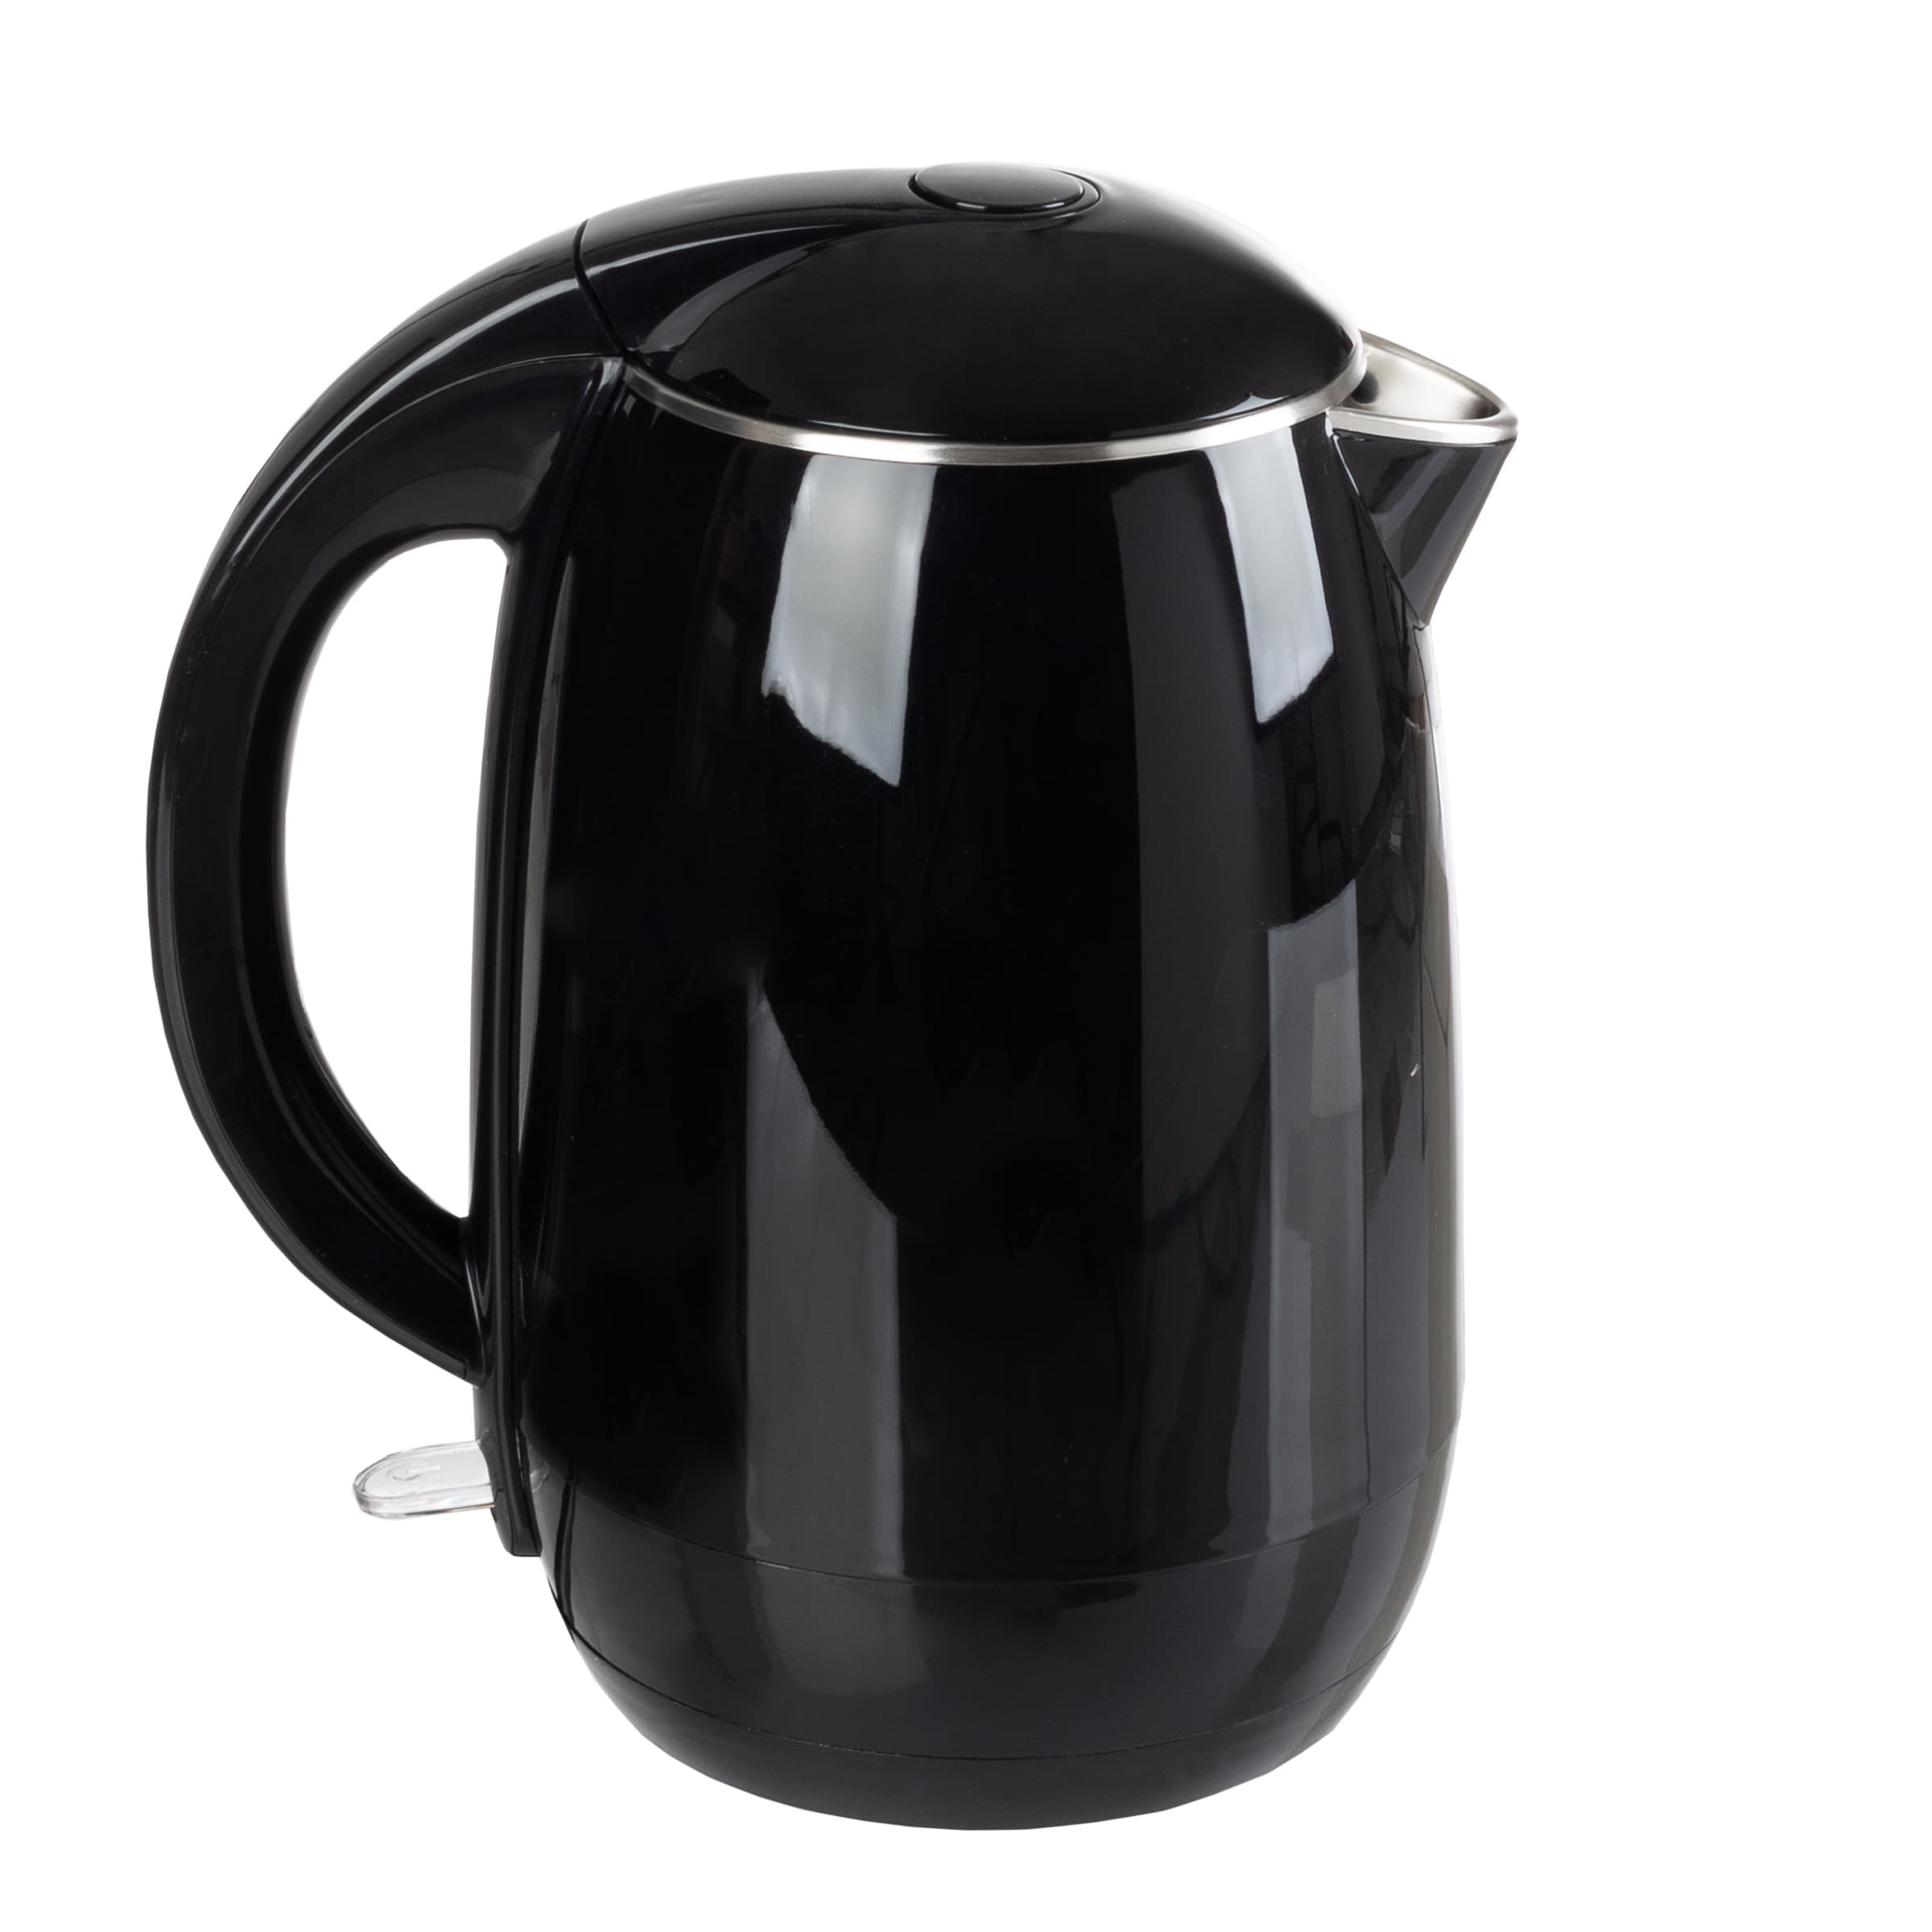 Electric Kettle - Auto-Off Rapid Boil Water Heater by Classic Cuisine - Black